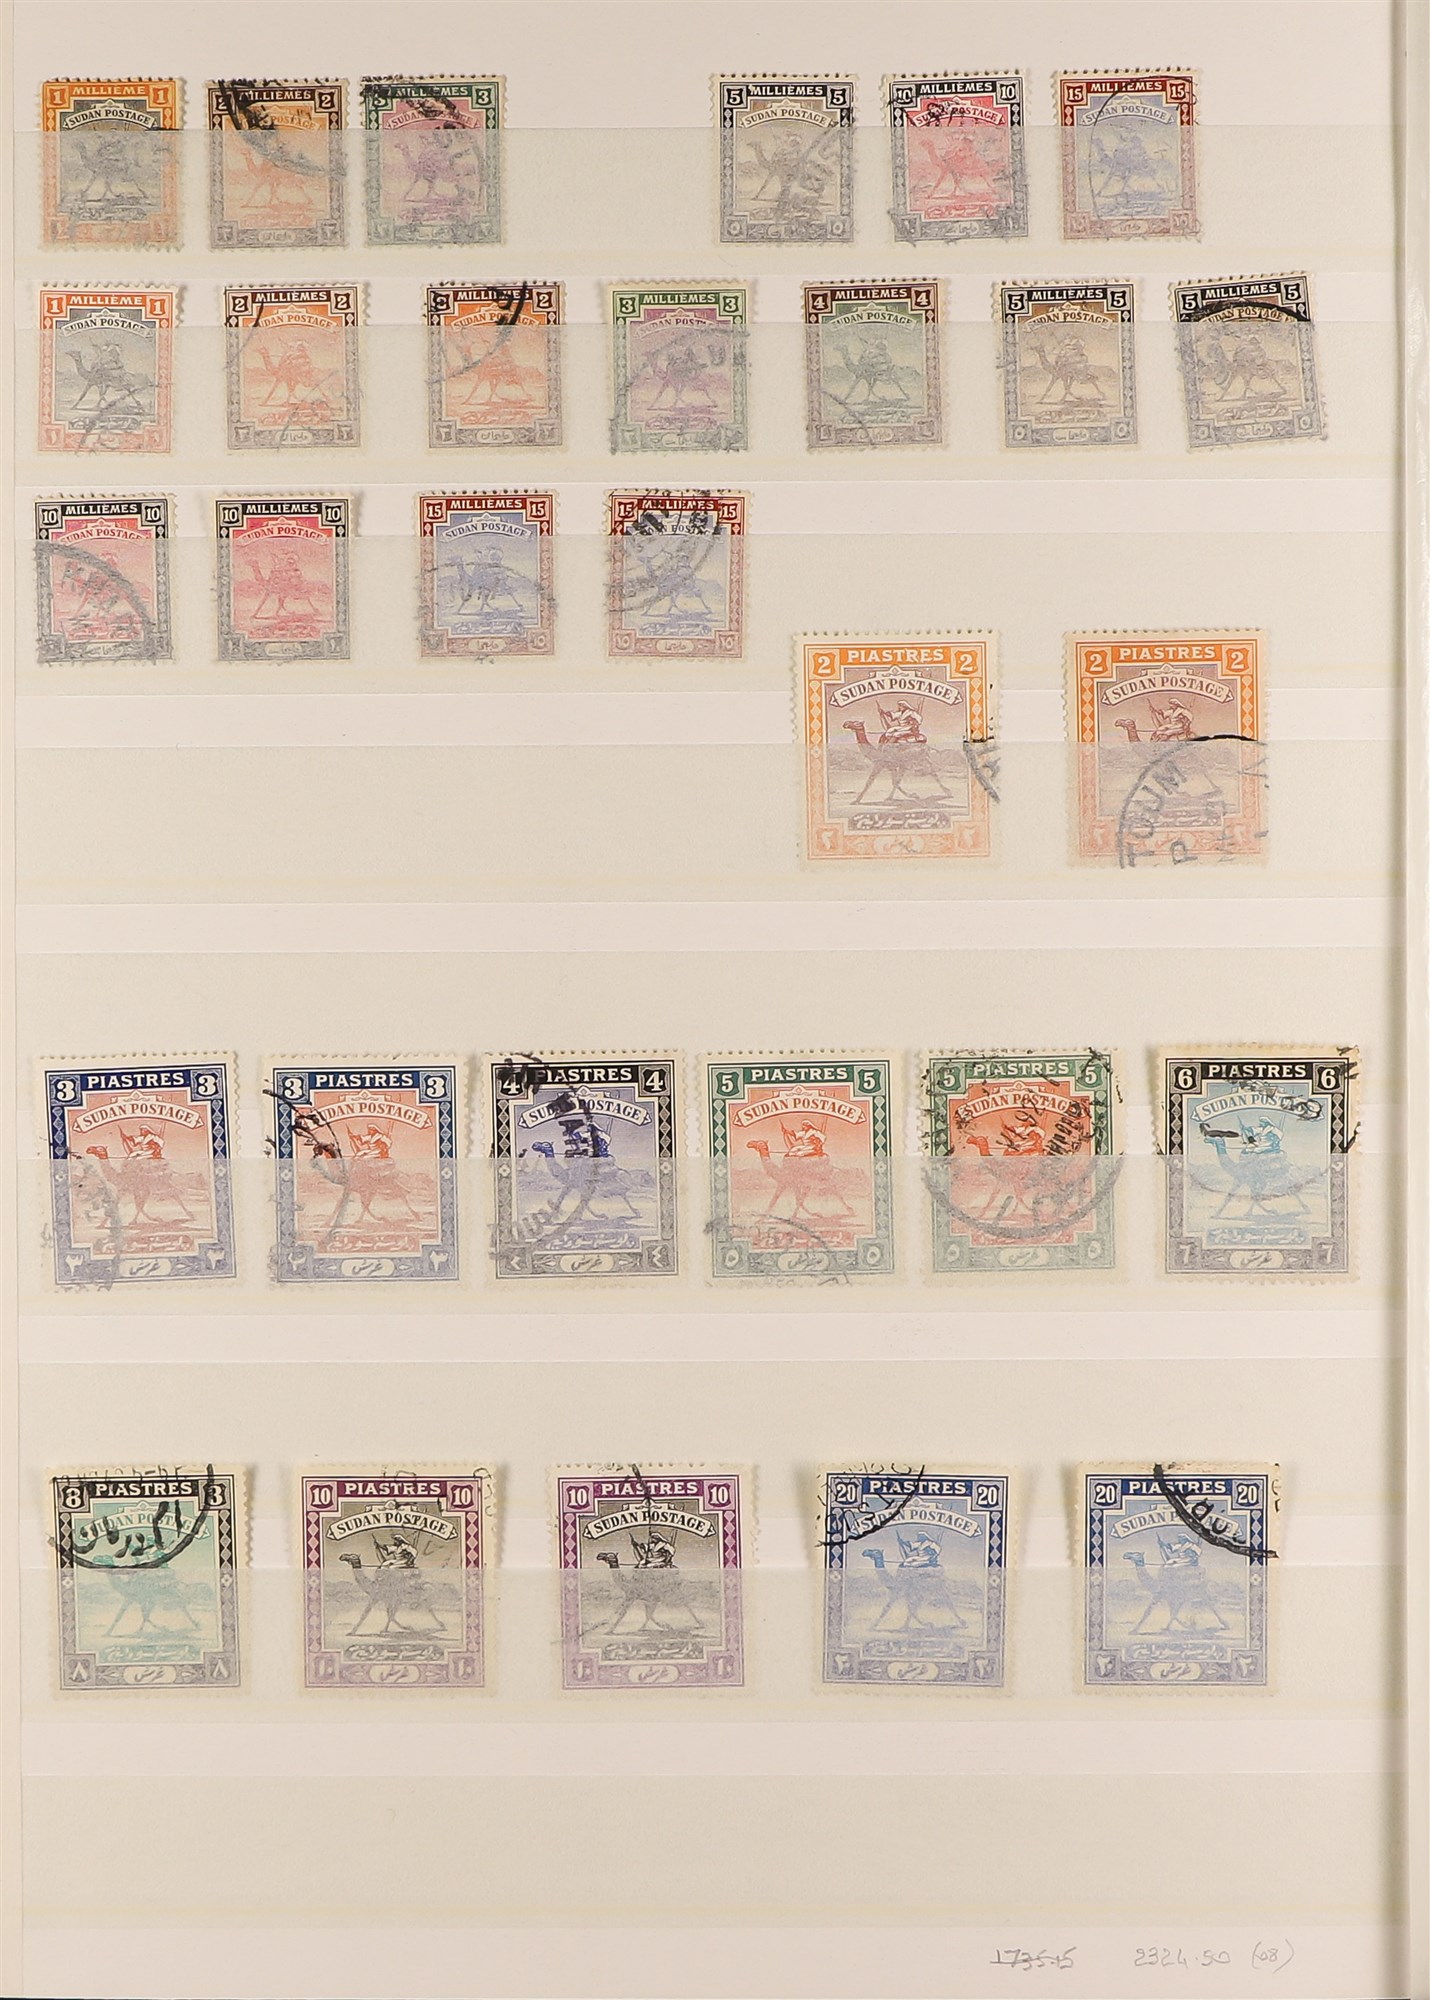 SUDAN 1897 - 1961 USED COLLECTION of 220+ stamps on protective pages, 1897 set to 5pi, 1898 set, - Image 3 of 10